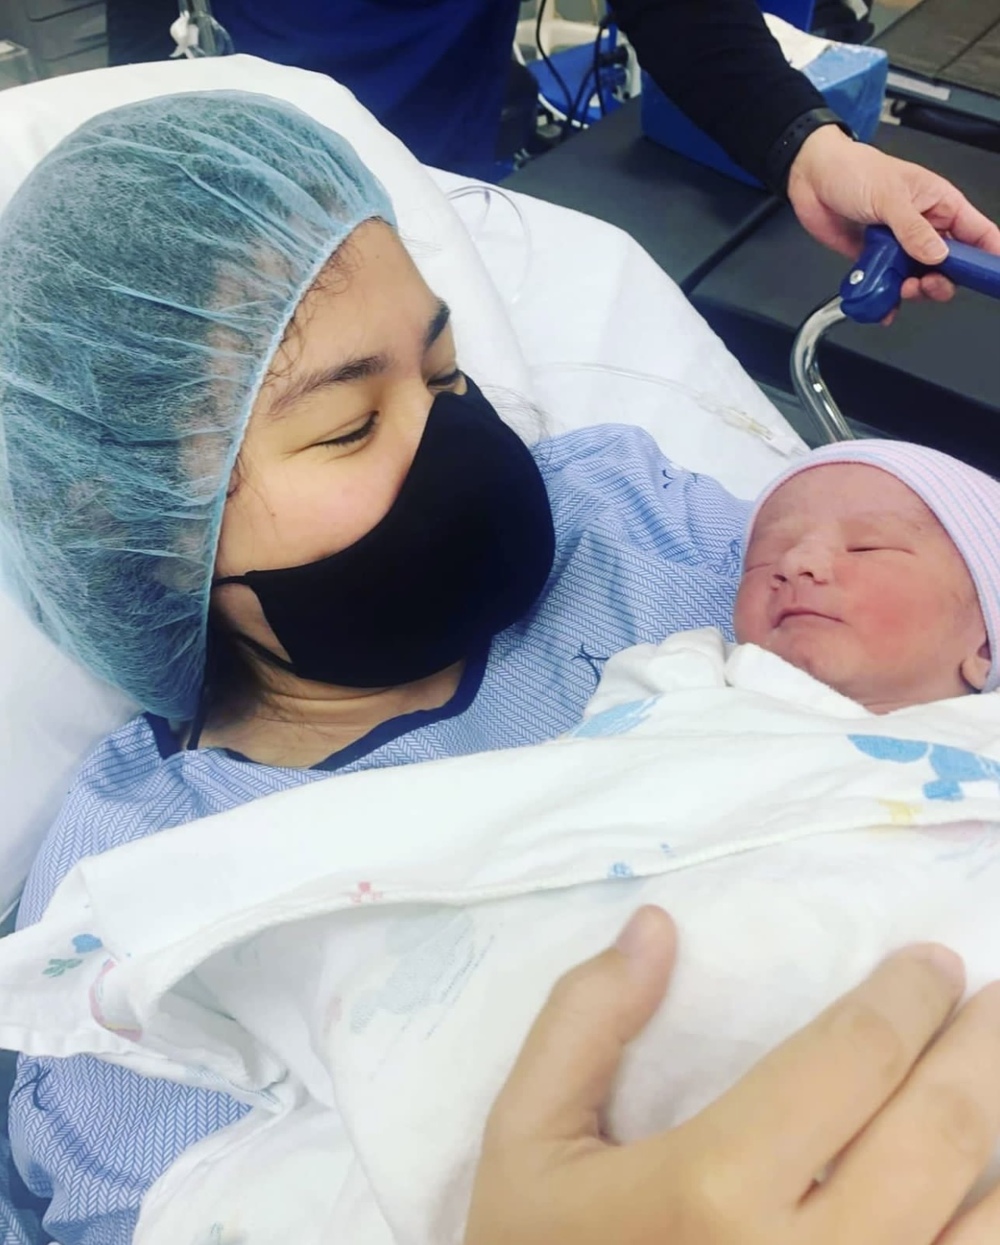 celebrities who welcomed babies: Gerphil Flores with baby Gustavo